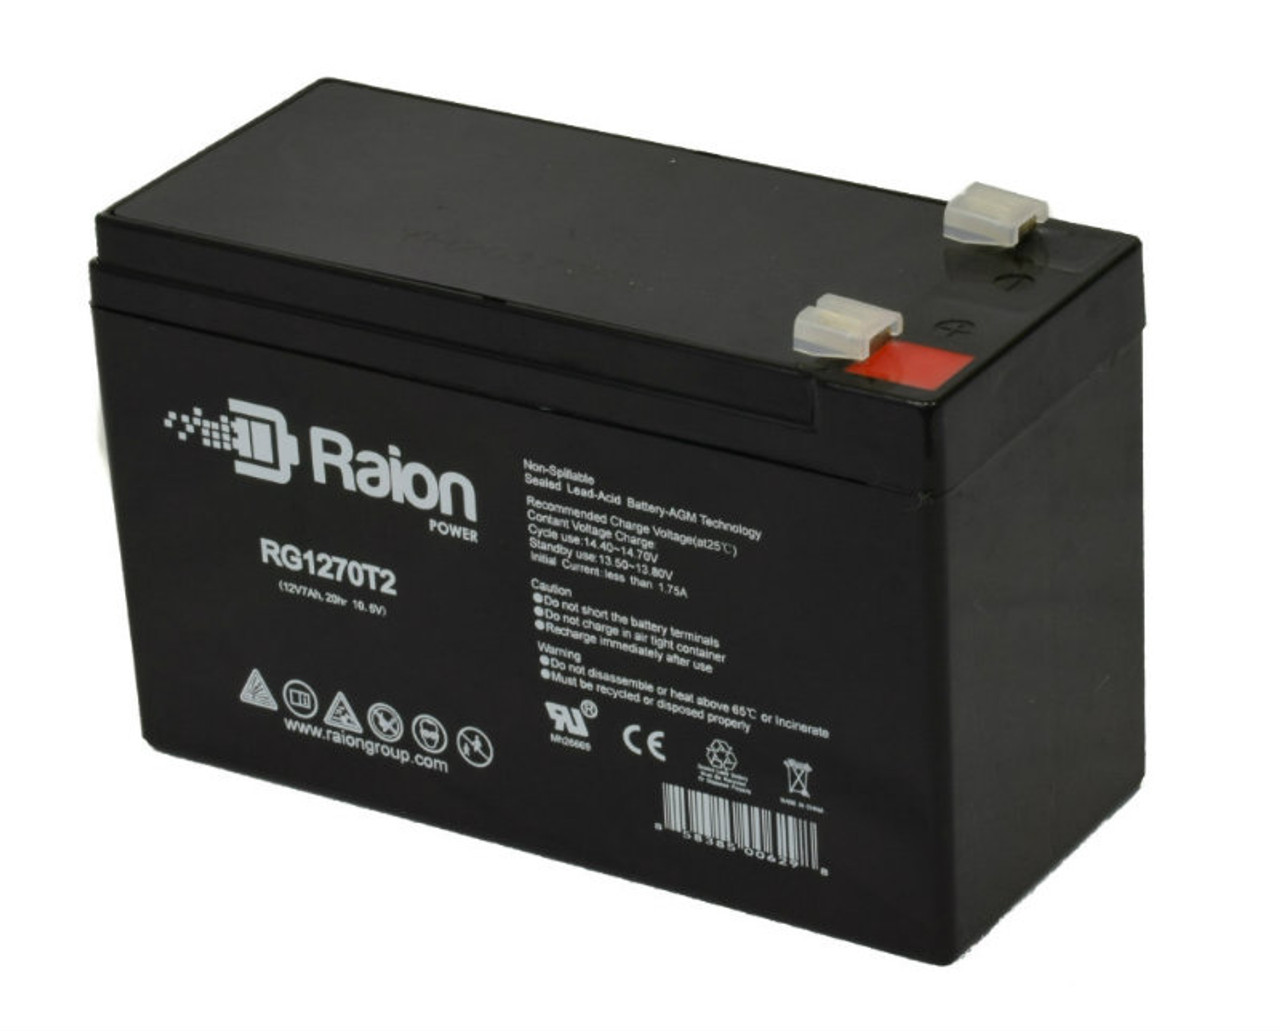 Raion Power RG1270T1 12V 7Ah Non-Spillable Replacement Battery for XNB SN12007.2 F1